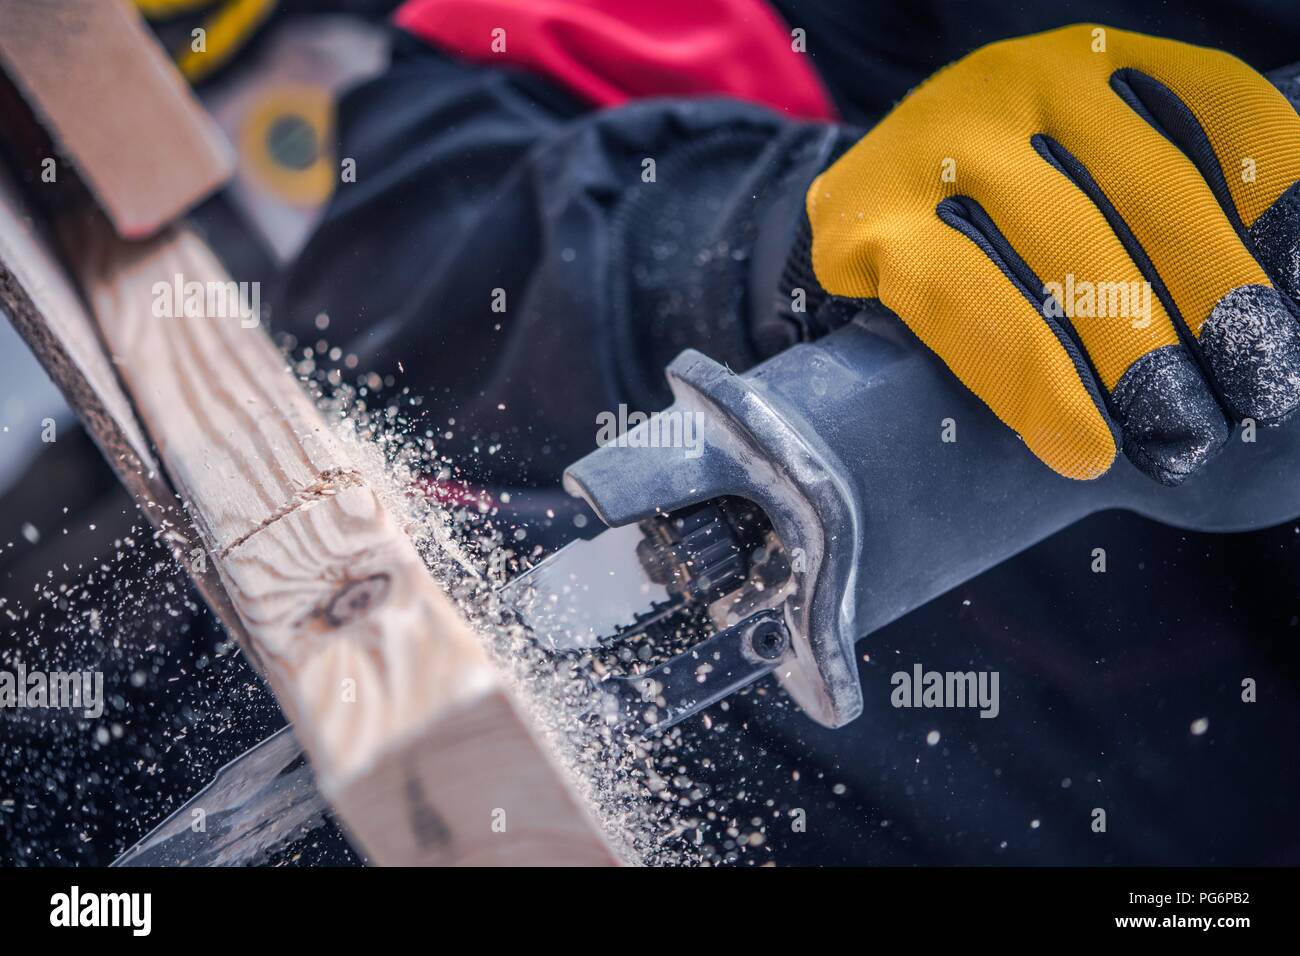 Reciprocating Saw Closeup Photo. Power Tool Wood Cutting. Construction Industry. Stock Photo